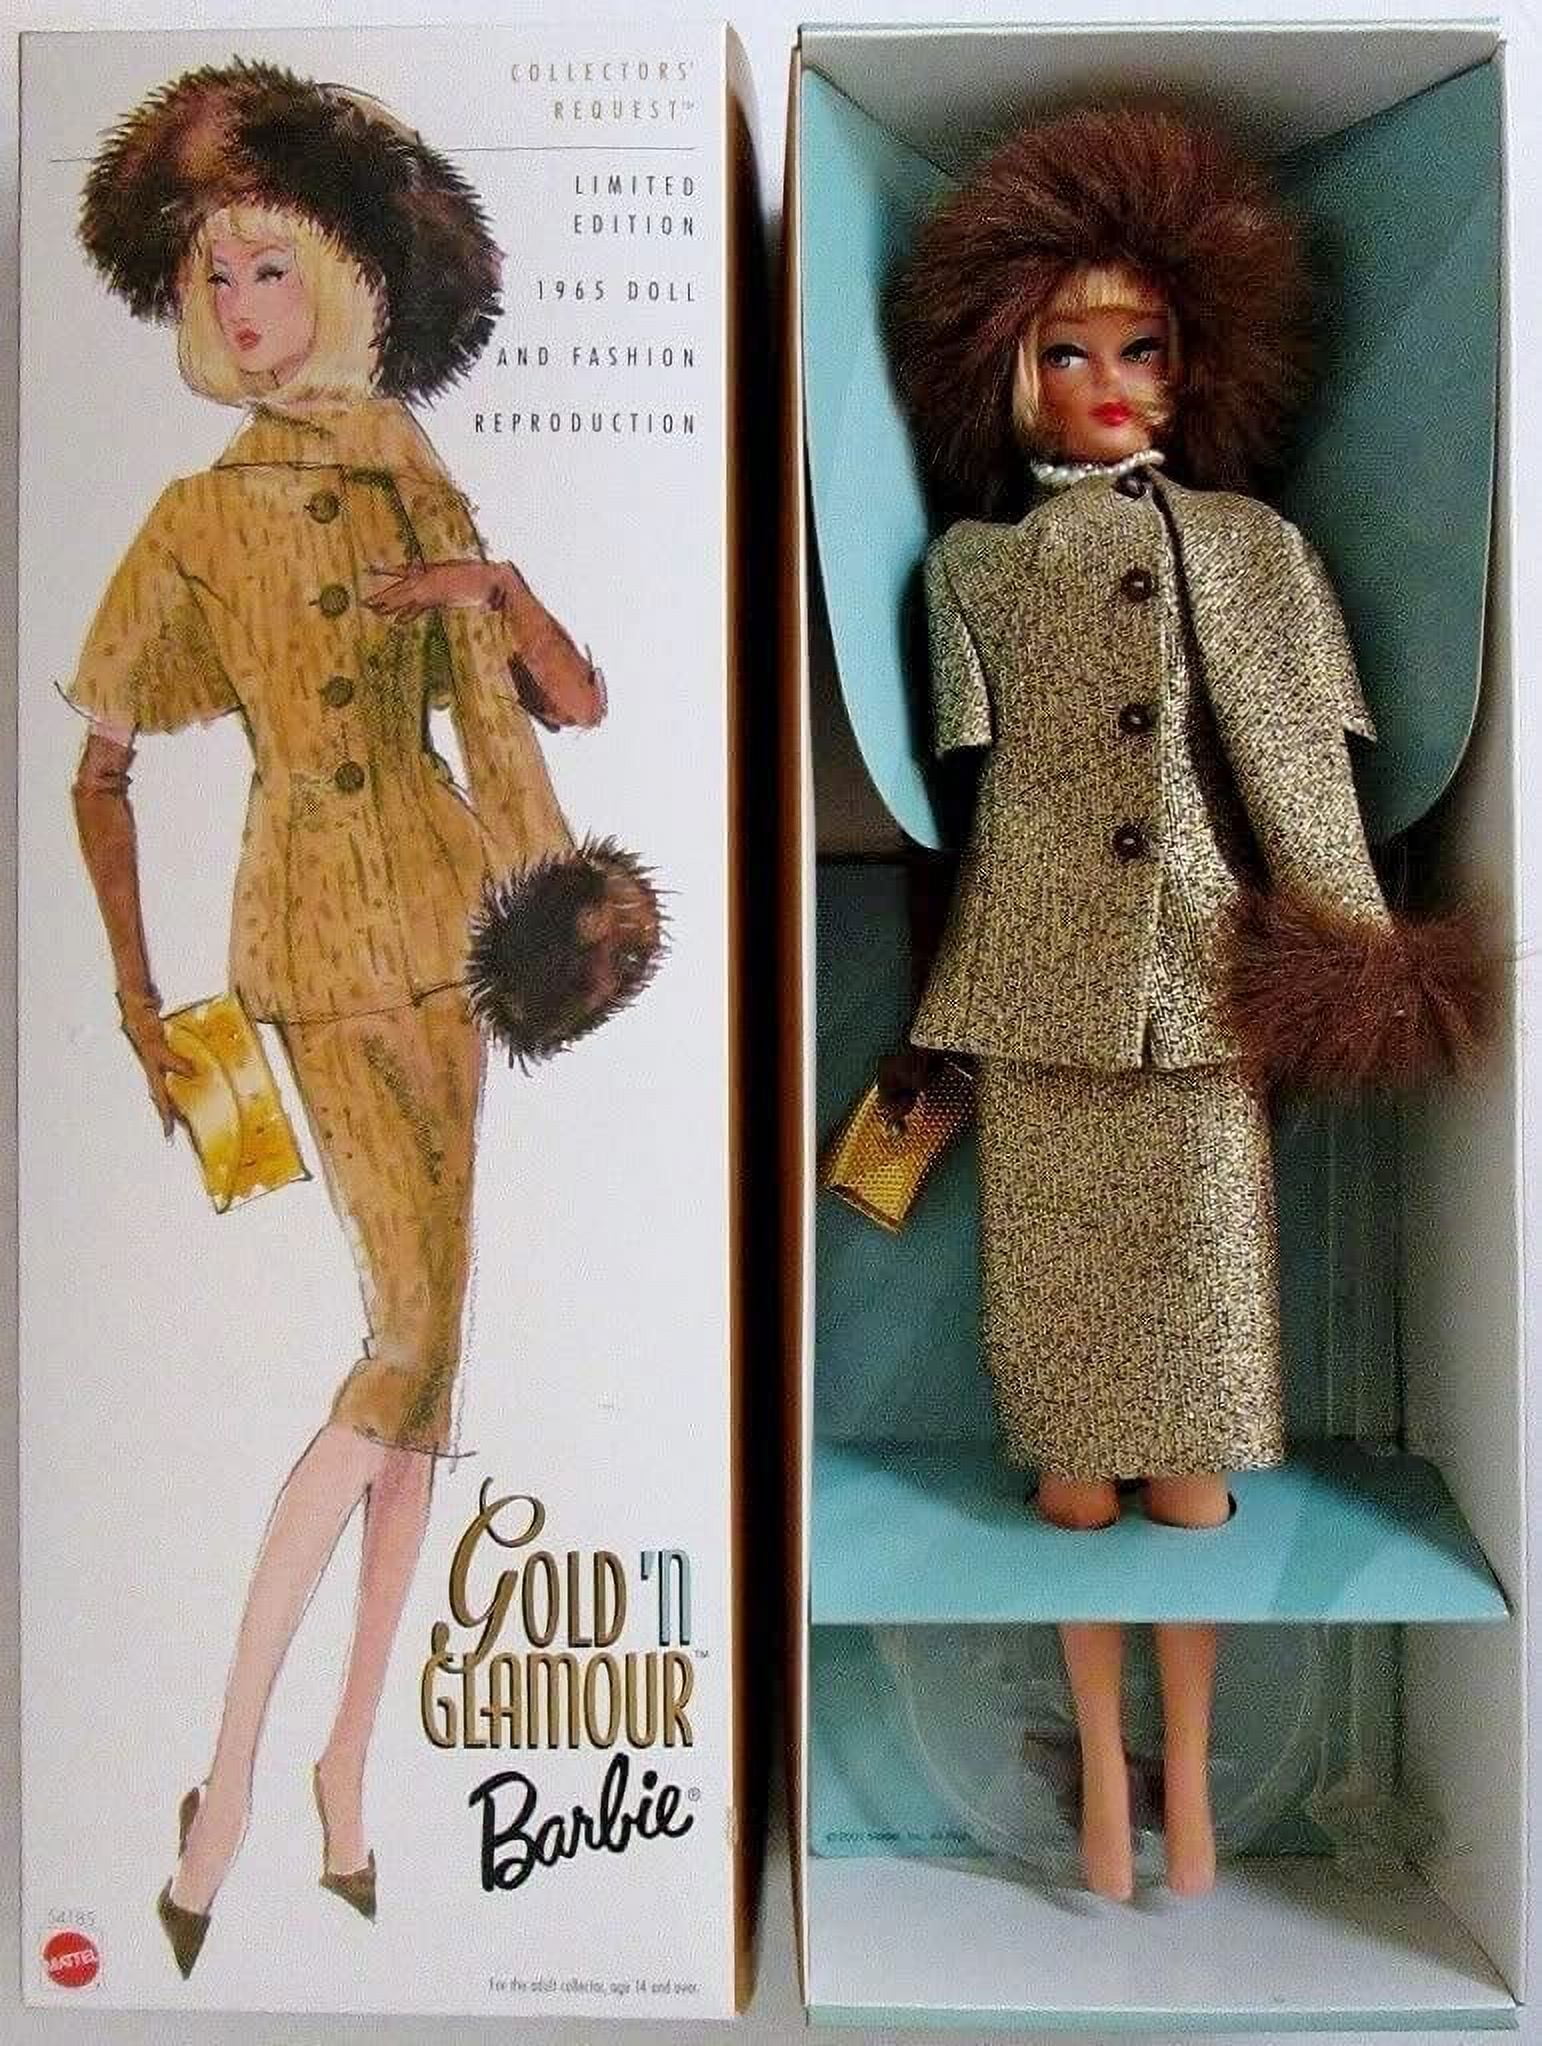 Gold 'n Glamour Barbie Doll Collector's Request Limited Edition